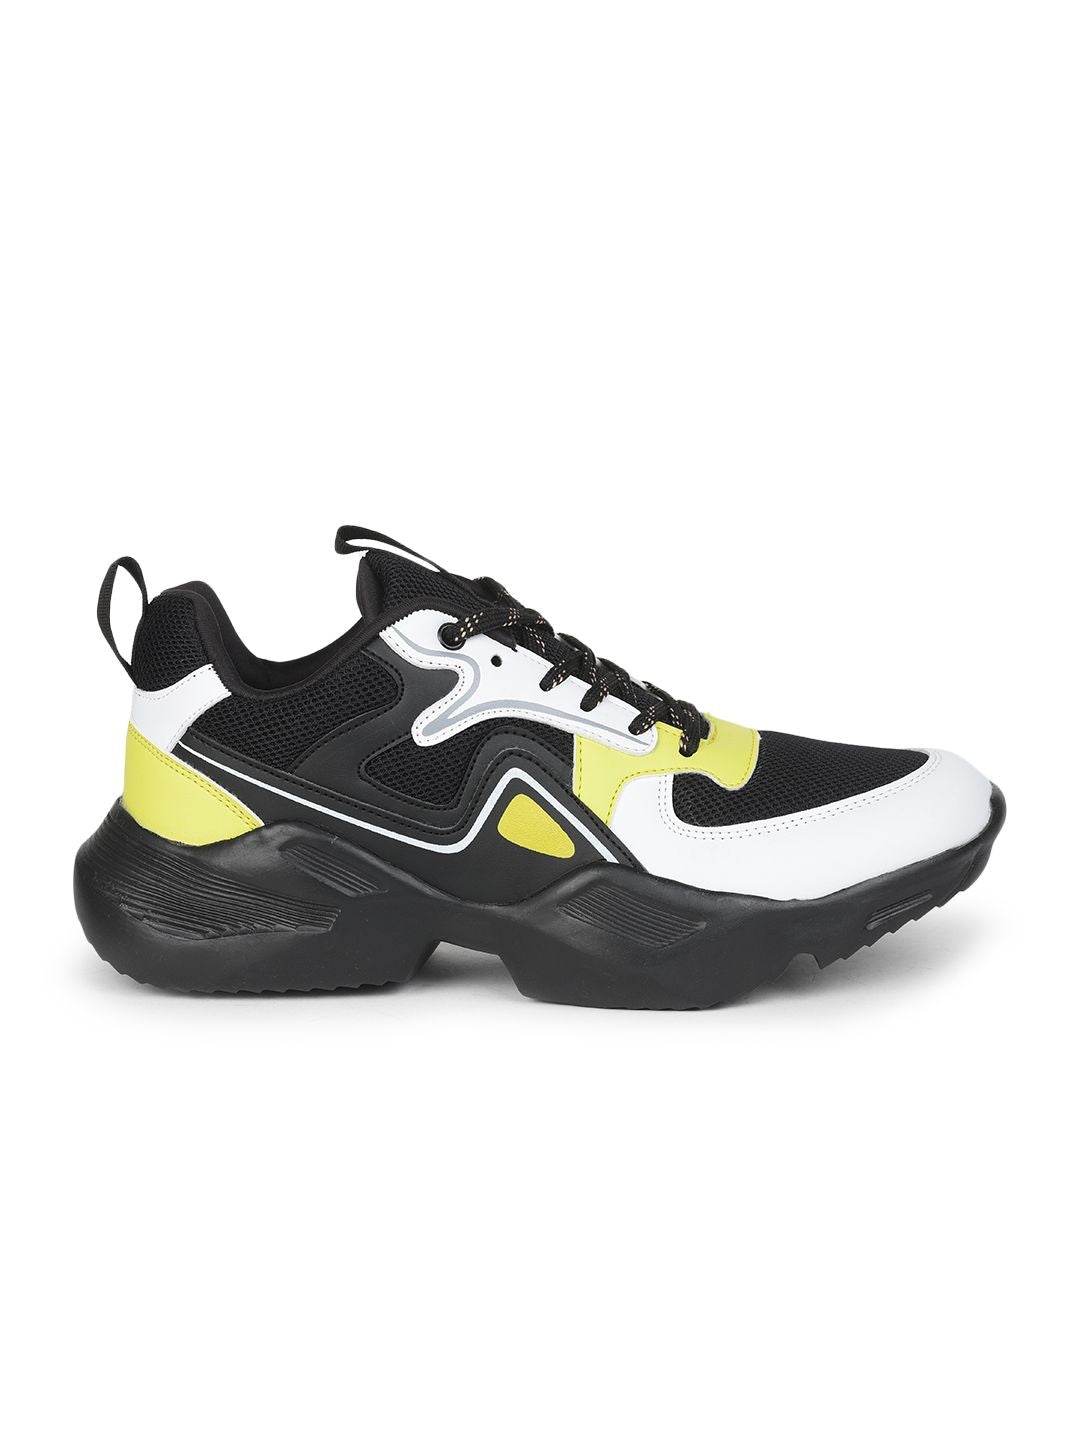 LEAP7X By Liberty Sports Shoes For MENS (6175001100) | Book Bargain Buy